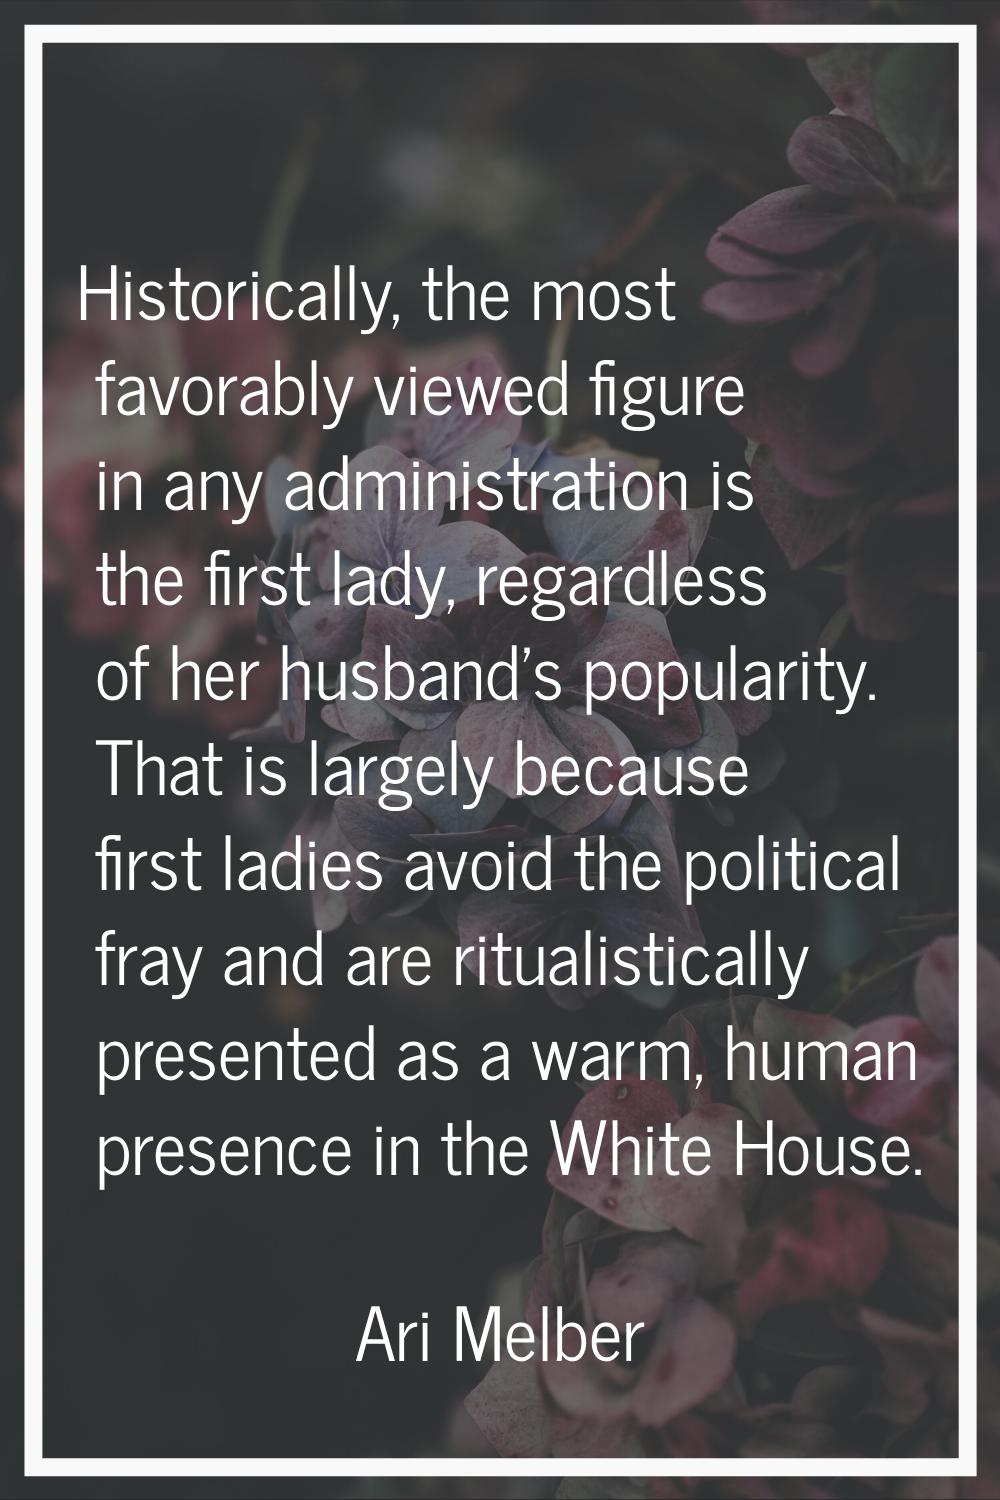 Historically, the most favorably viewed figure in any administration is the first lady, regardless 